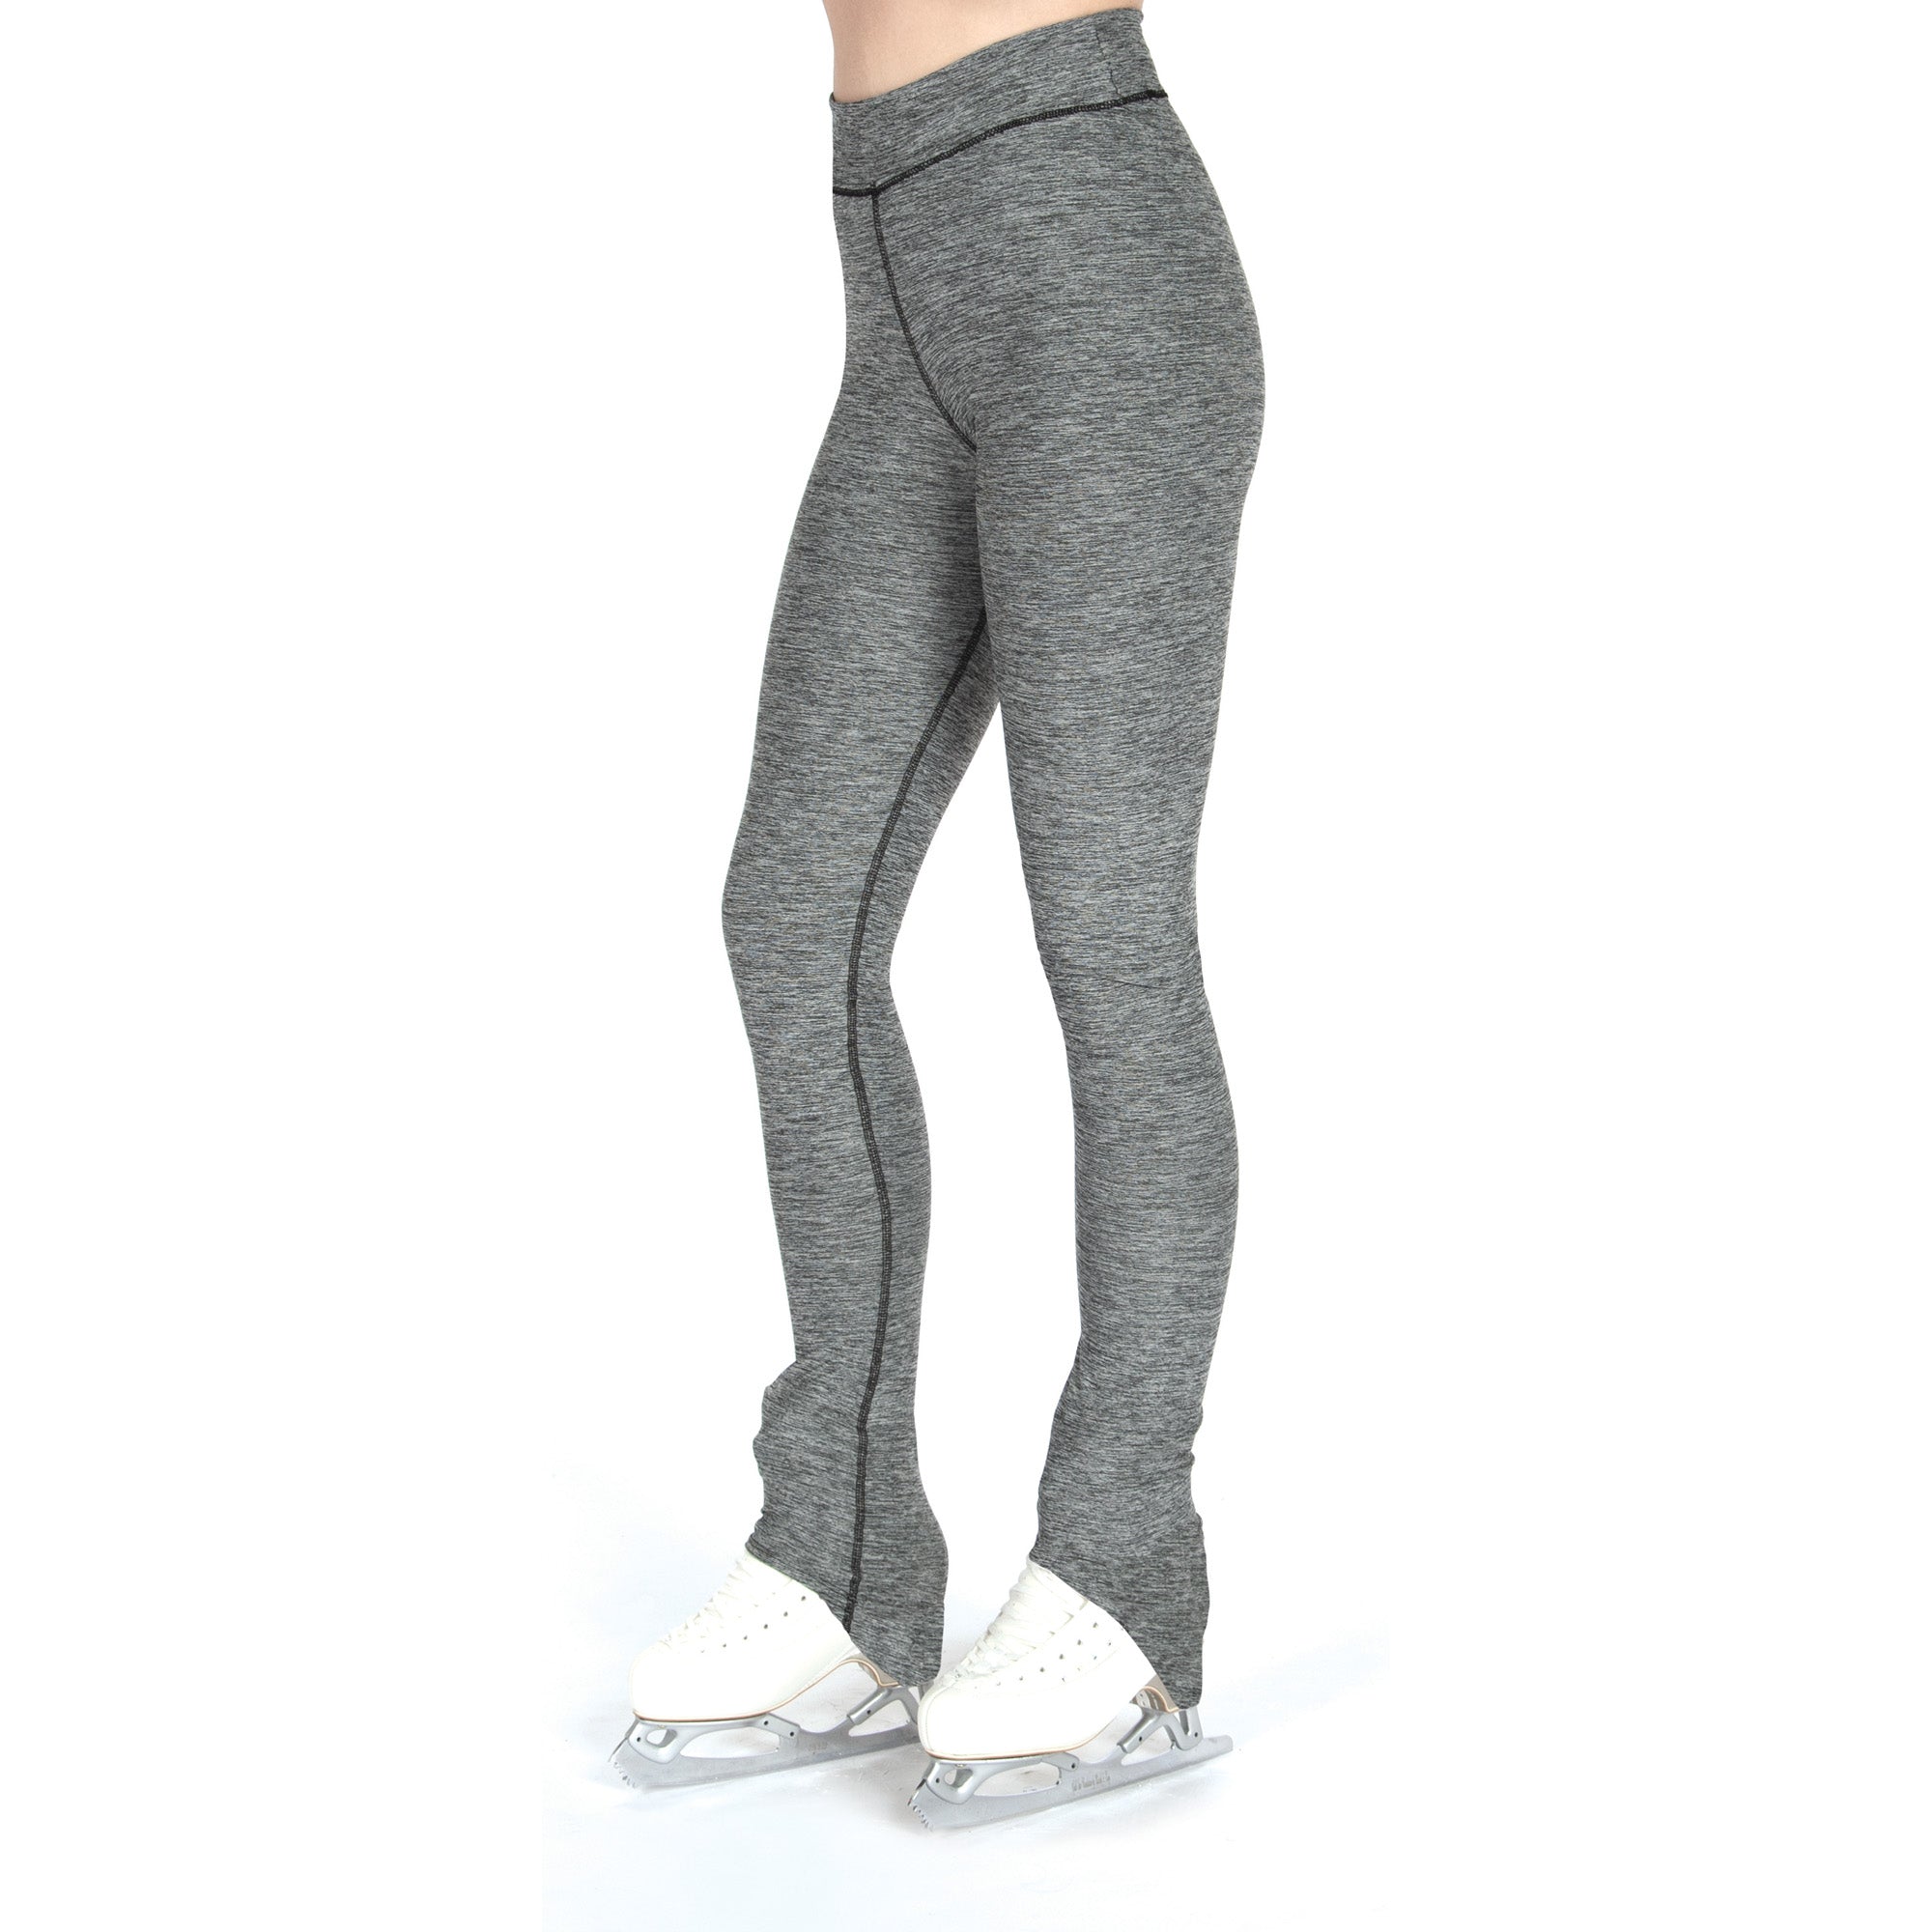 S108 Steel Grey Core Ice Marled Leggings by Jerry's